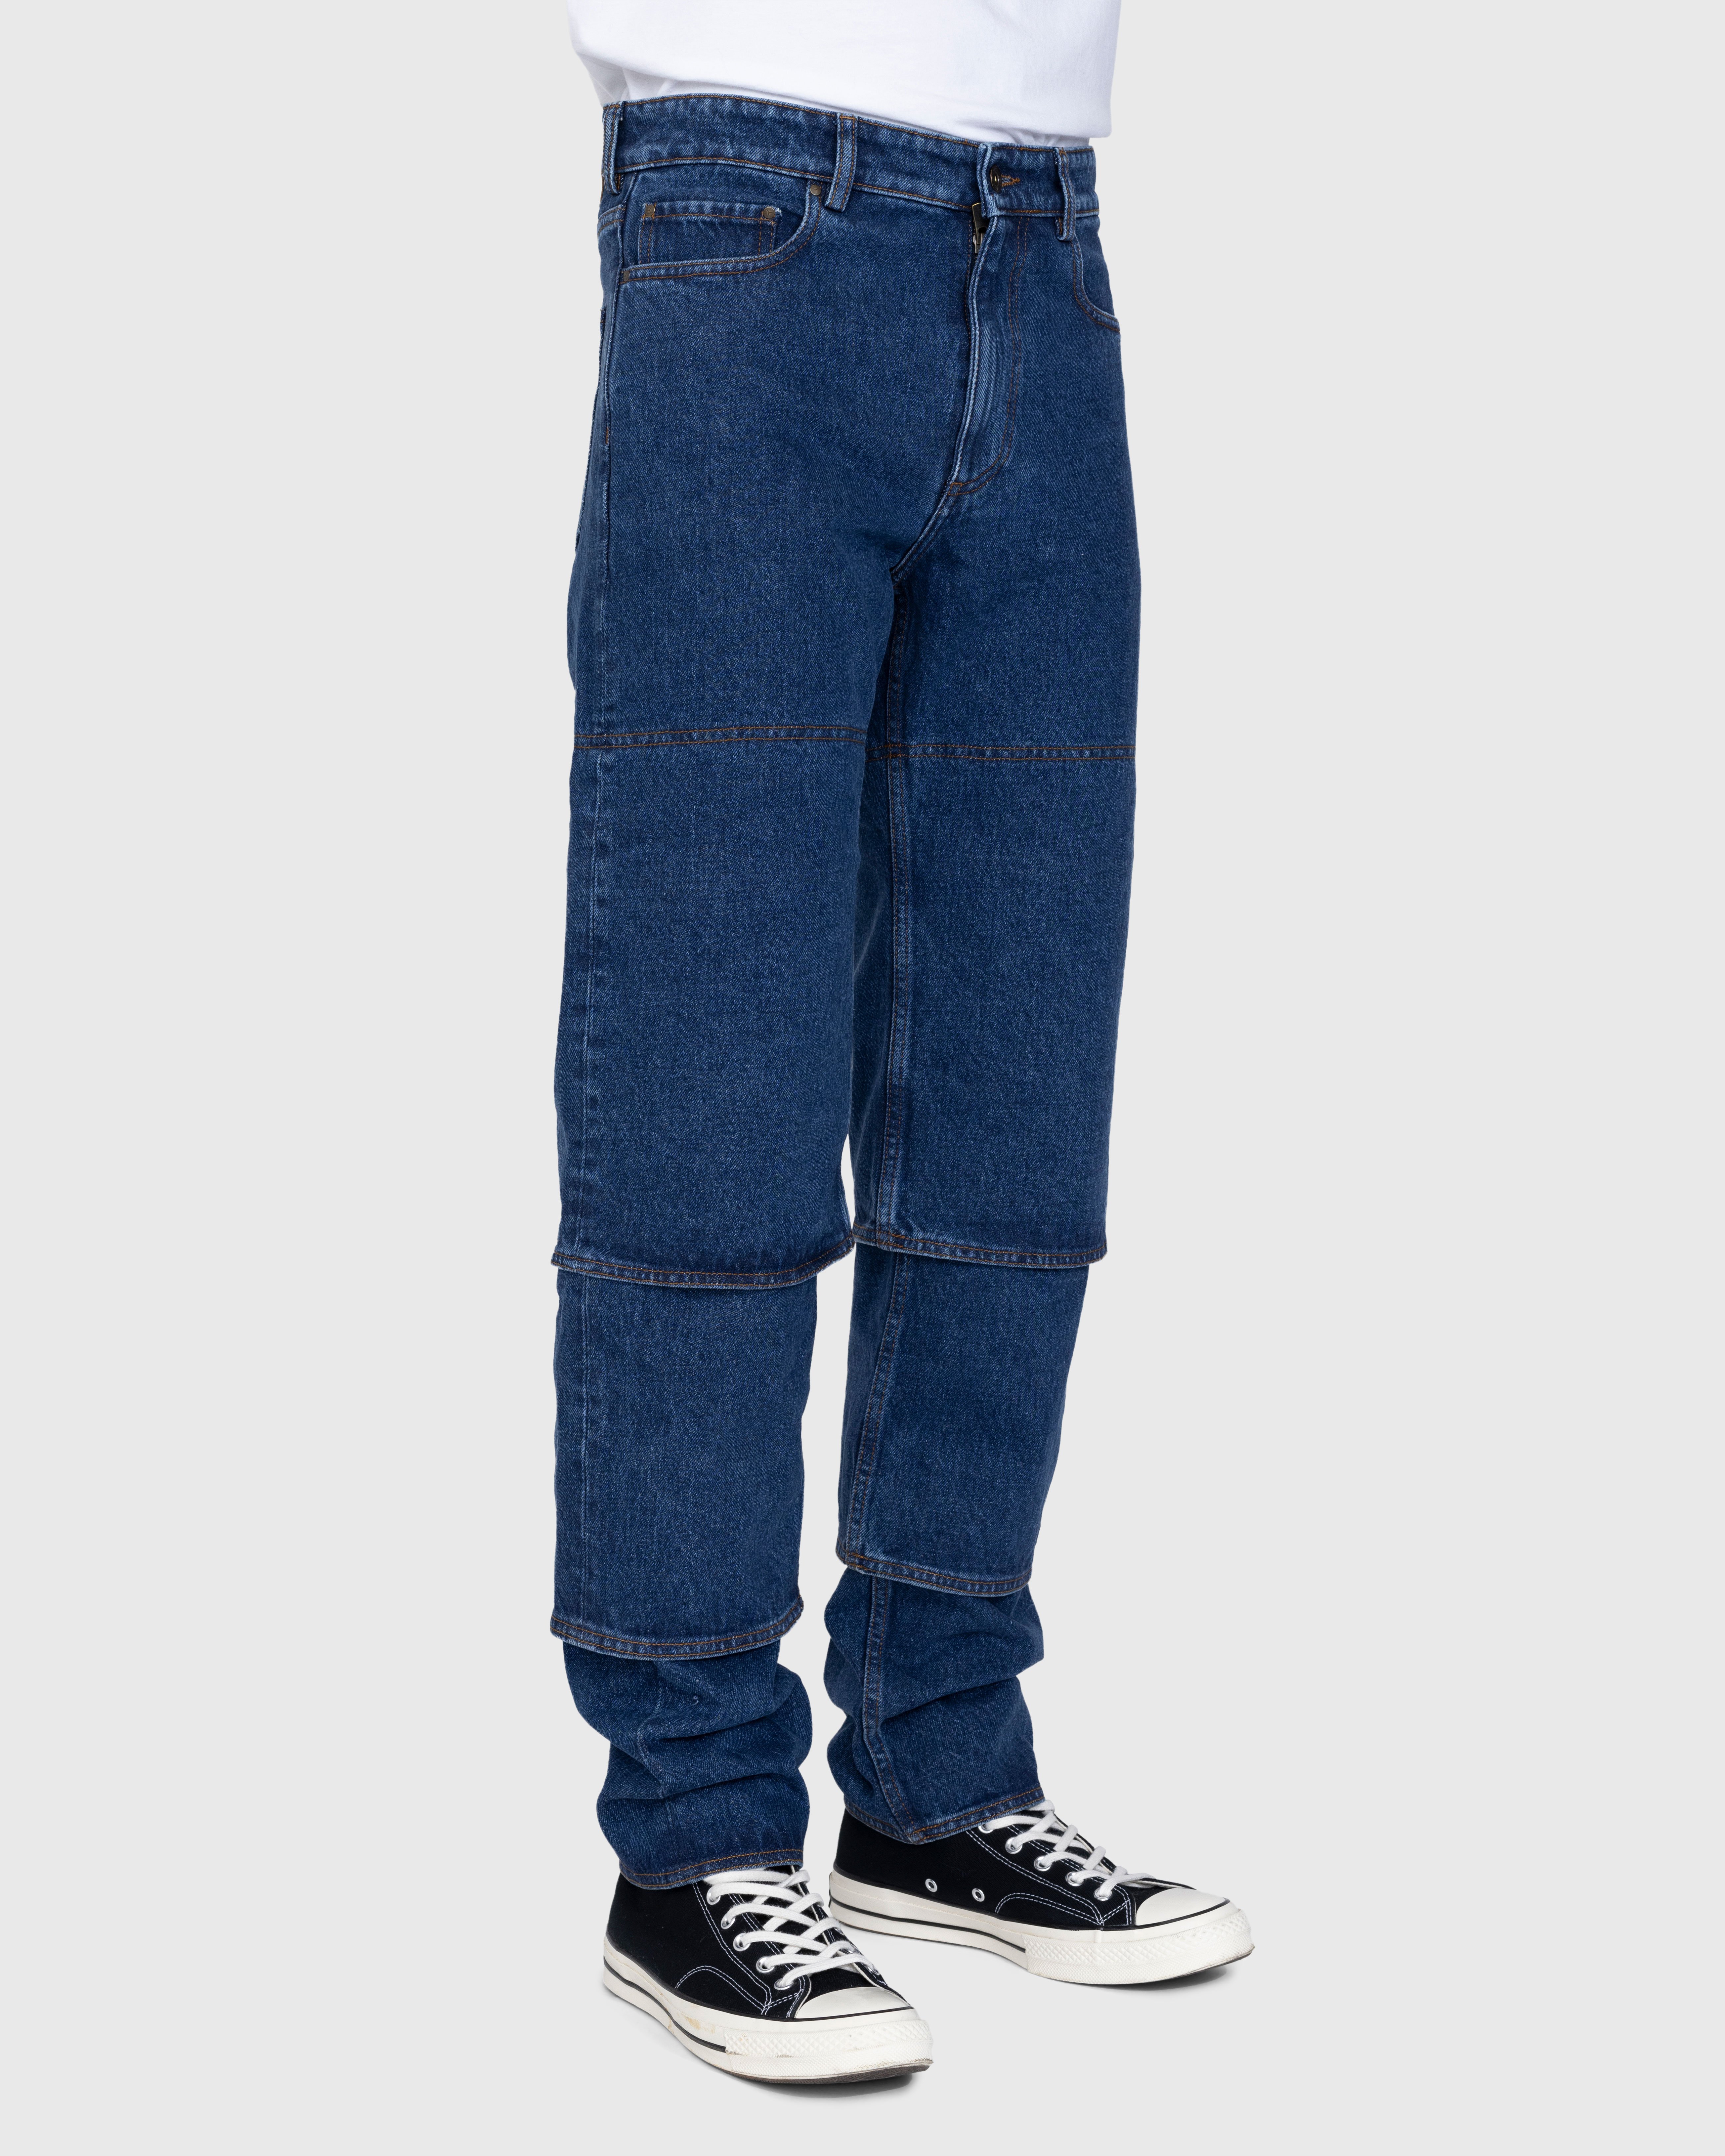 Y/Project - Classic Multi-Cuff Jeans Blue - Clothing - Blue - Image 4